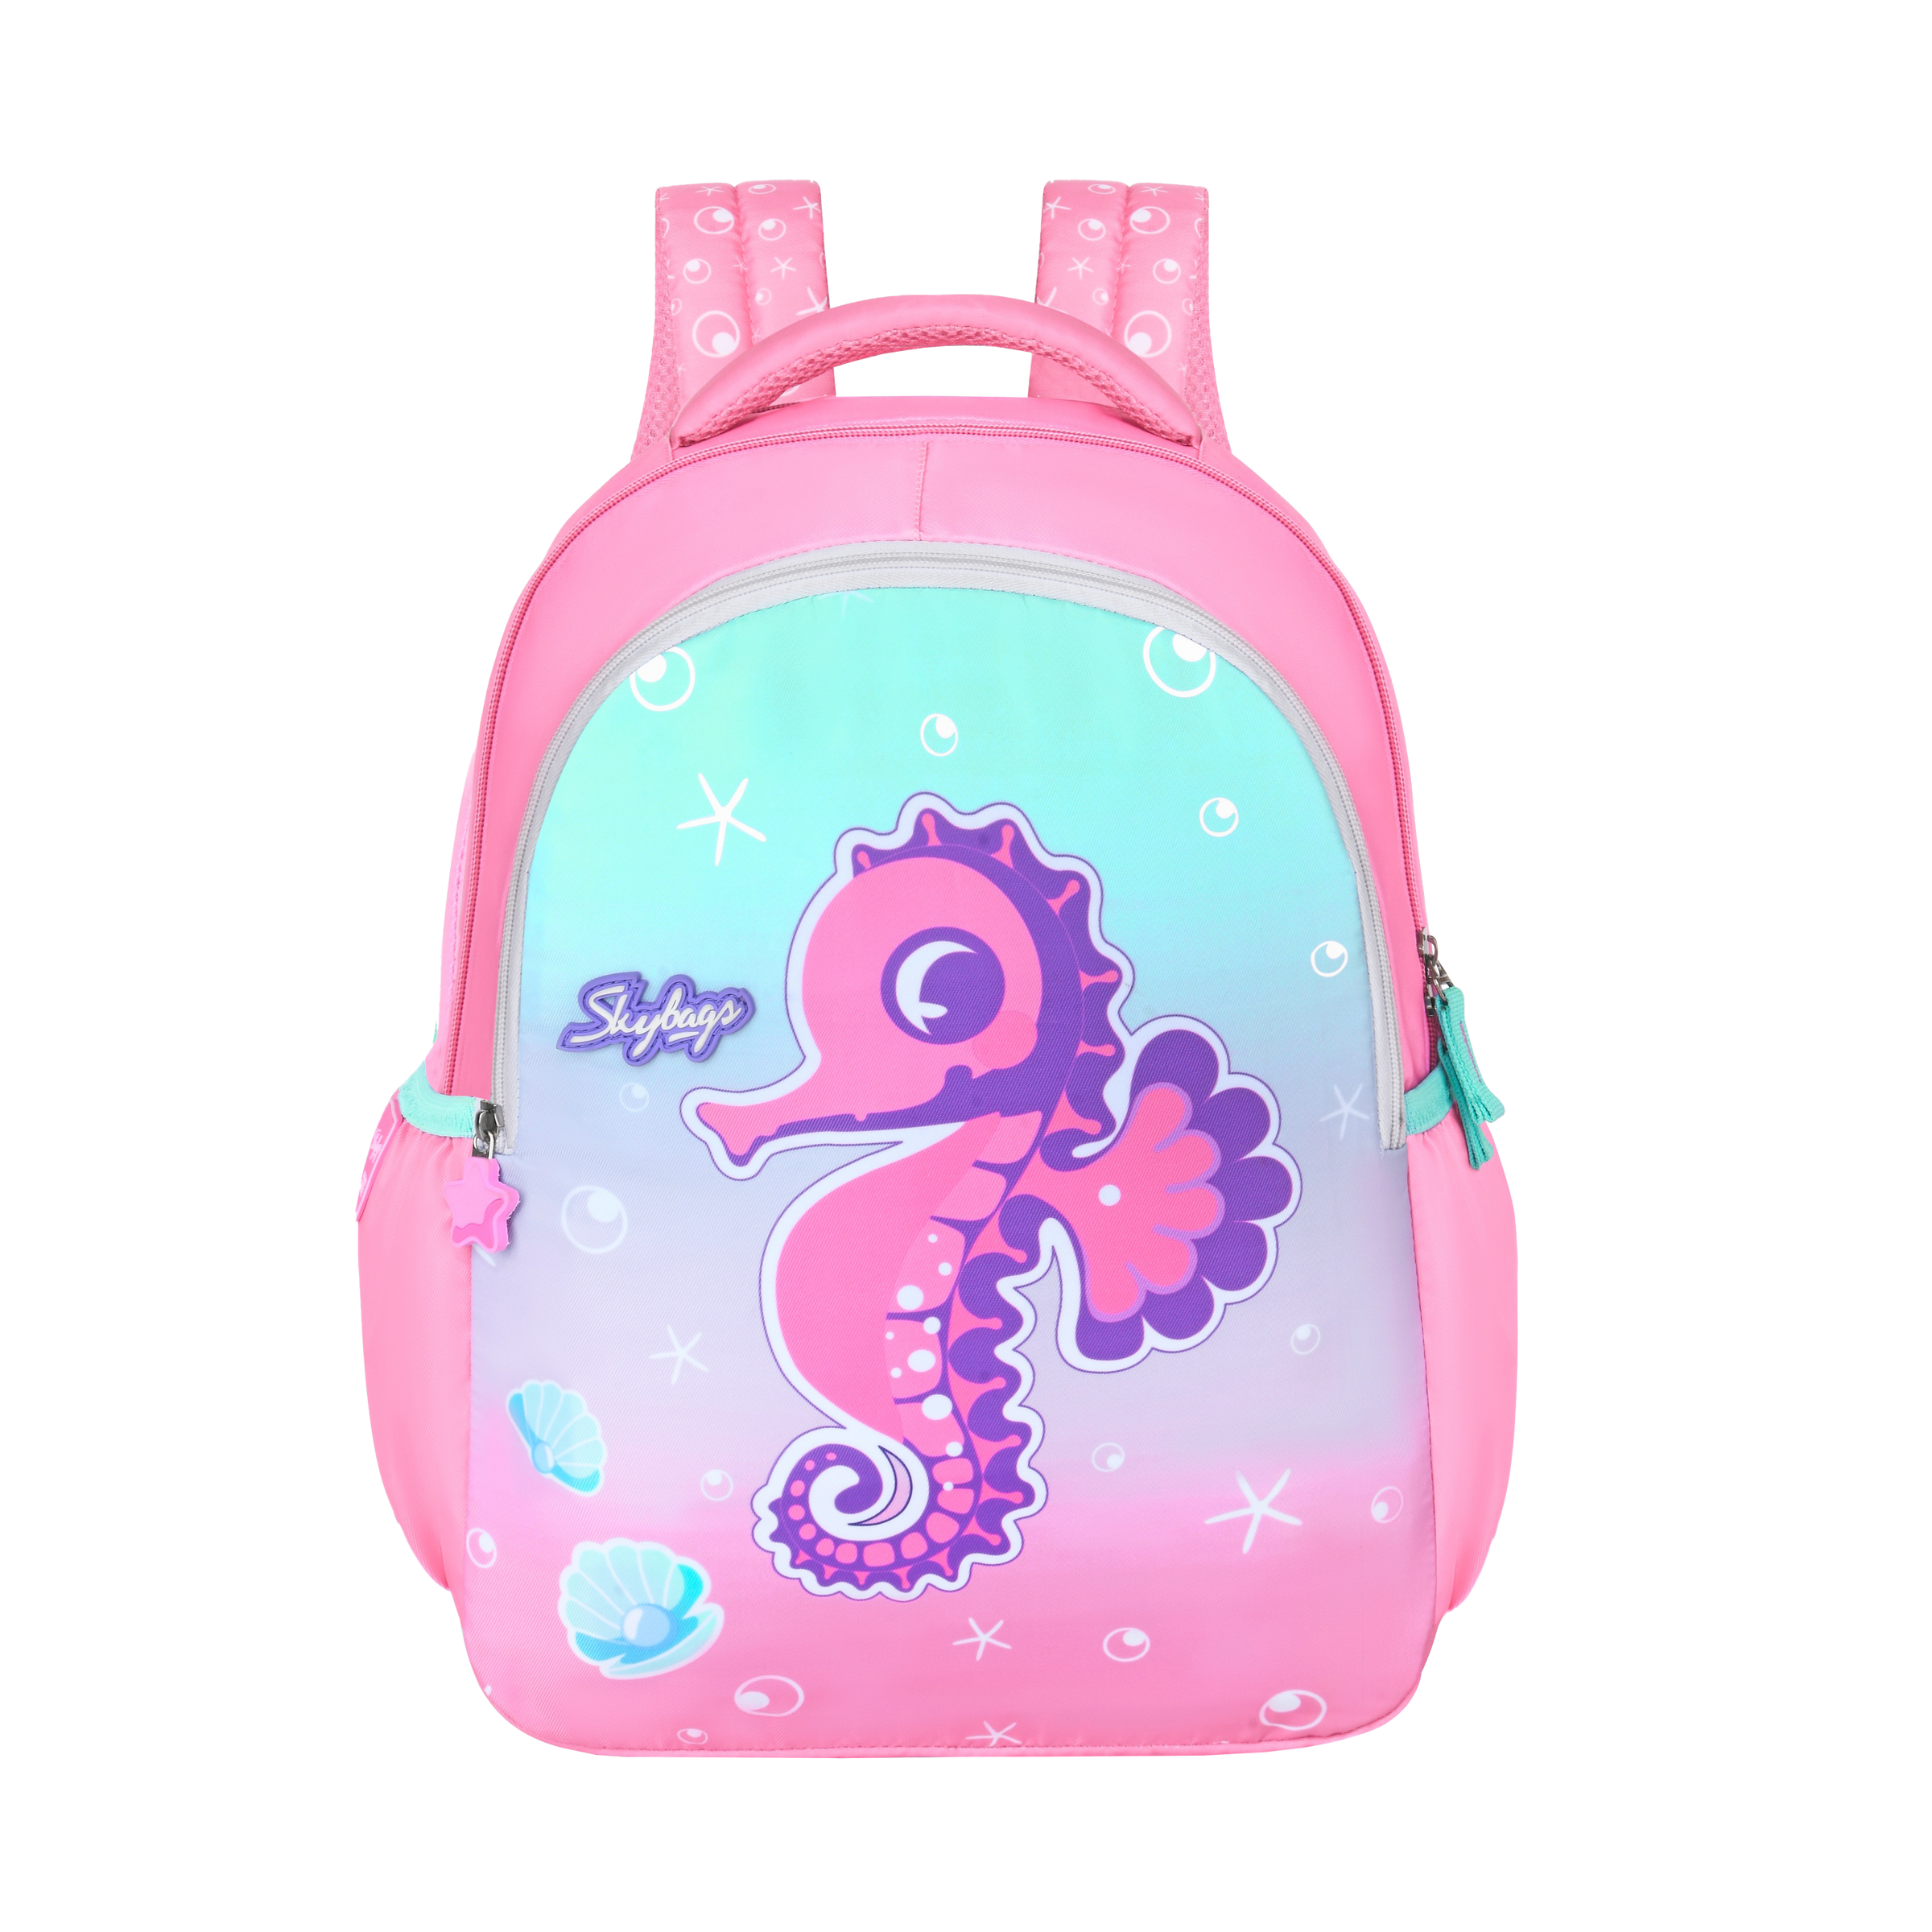 Skybags Snuggle Pink School Backpack With Printred ID Tag